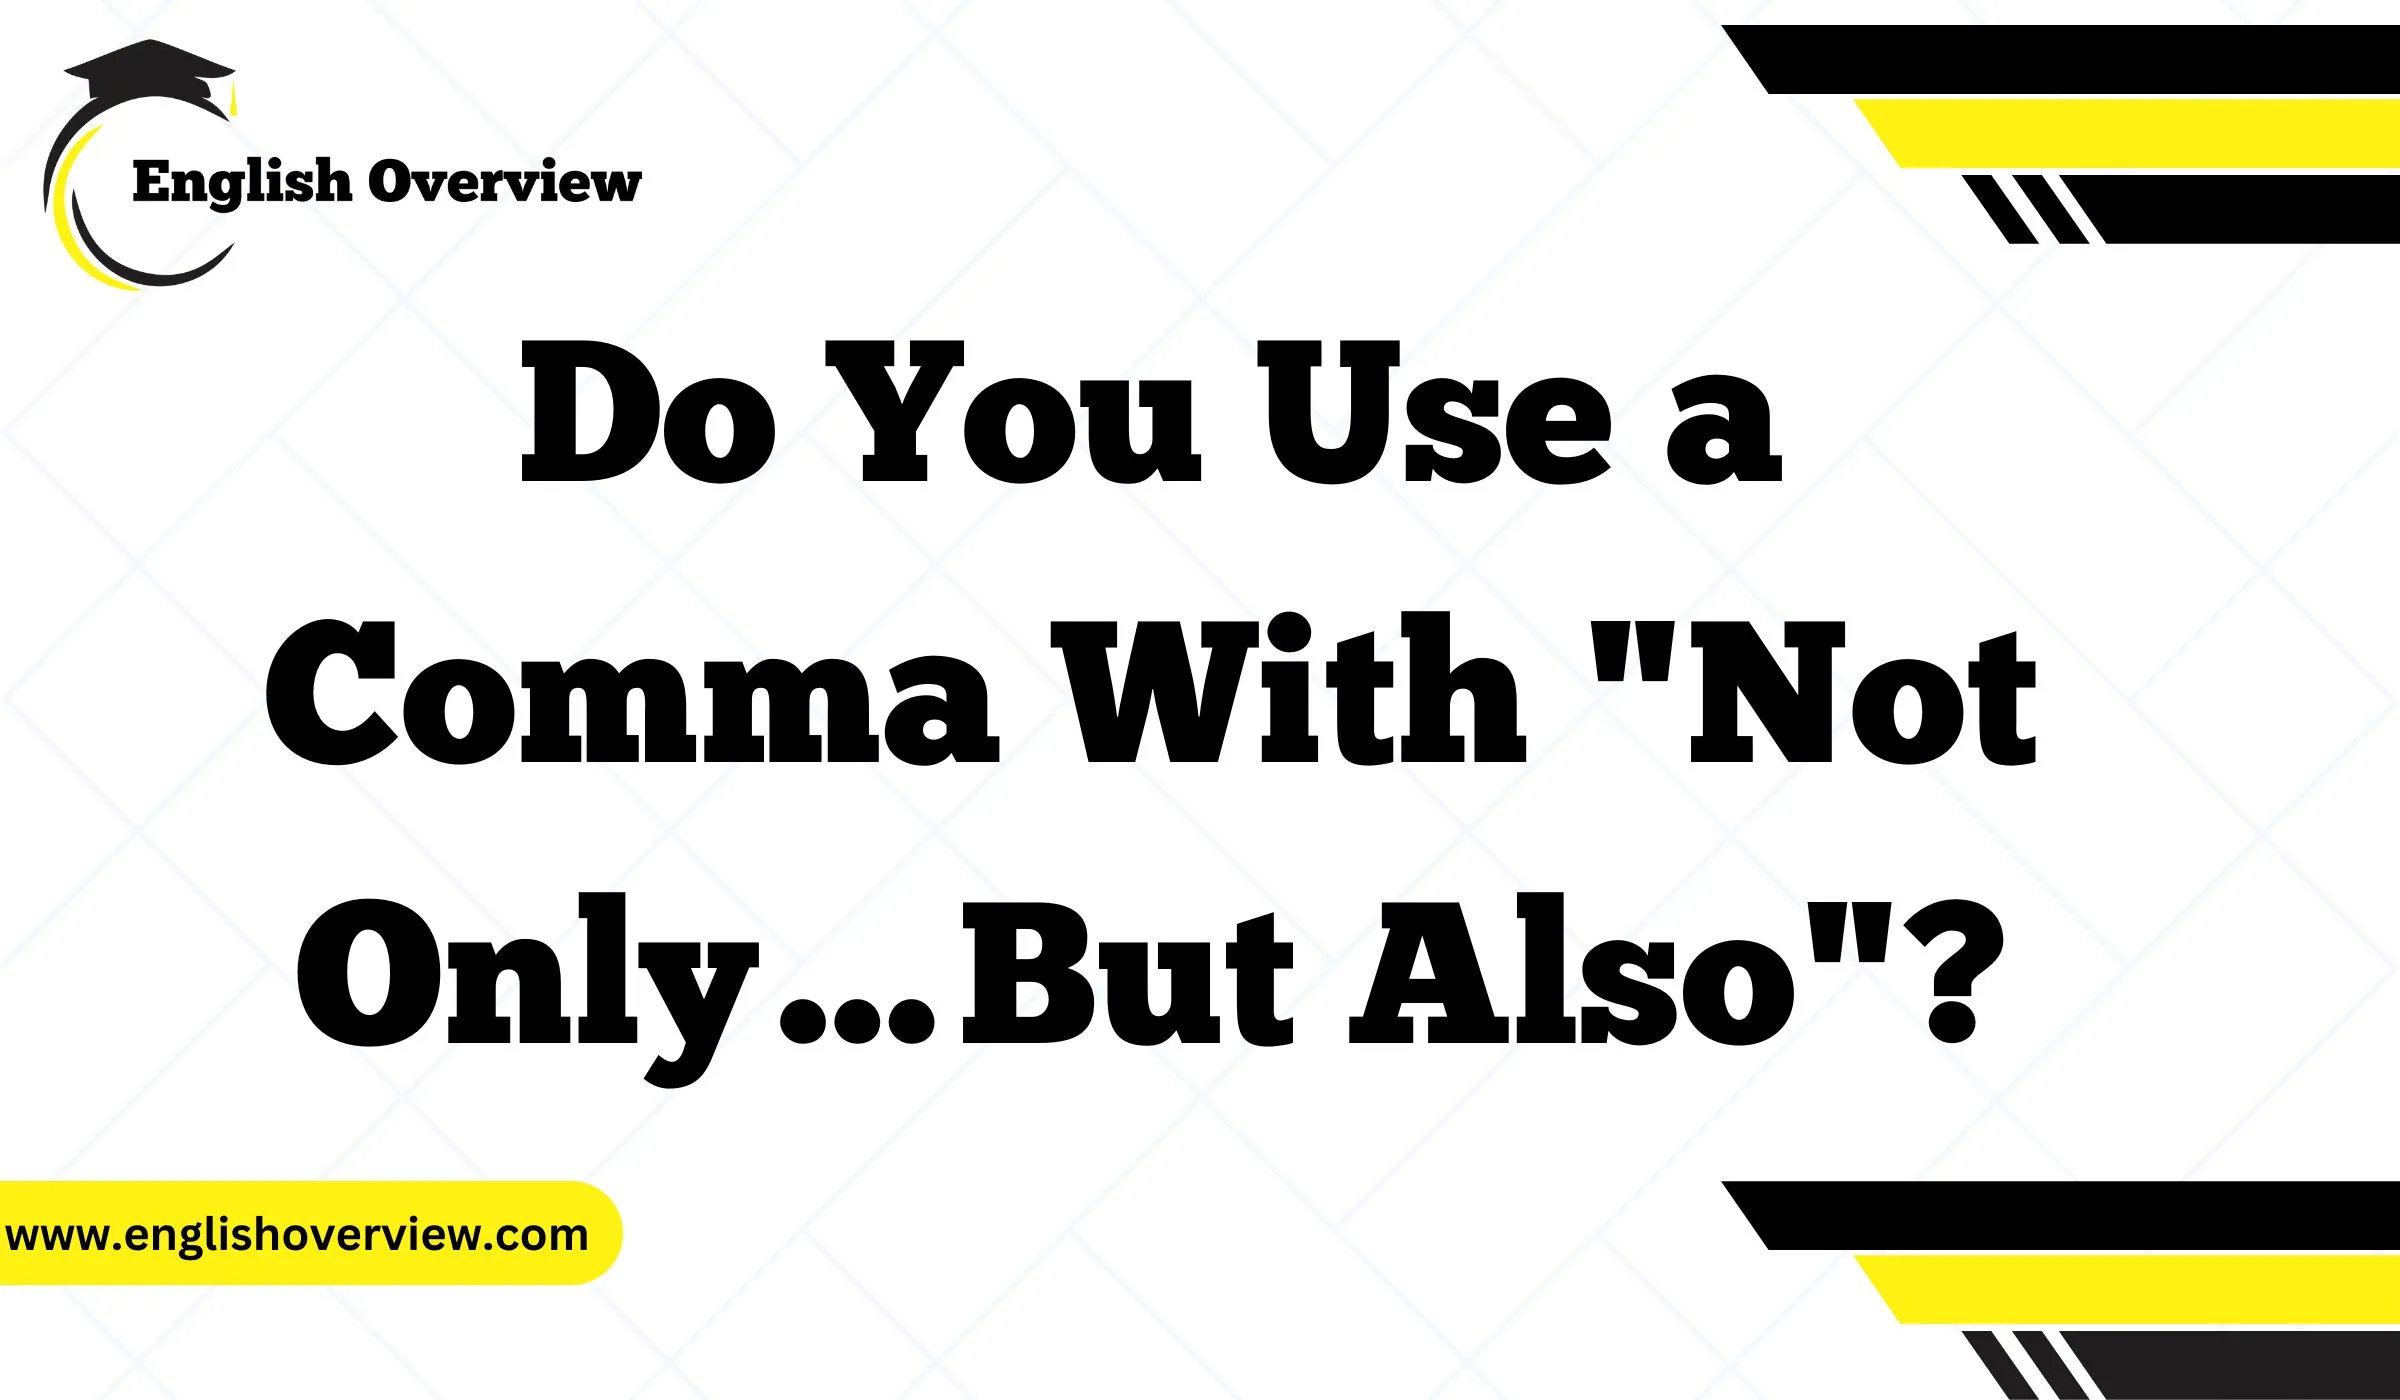 Do You Use a Comma With "Not Only…But Also"